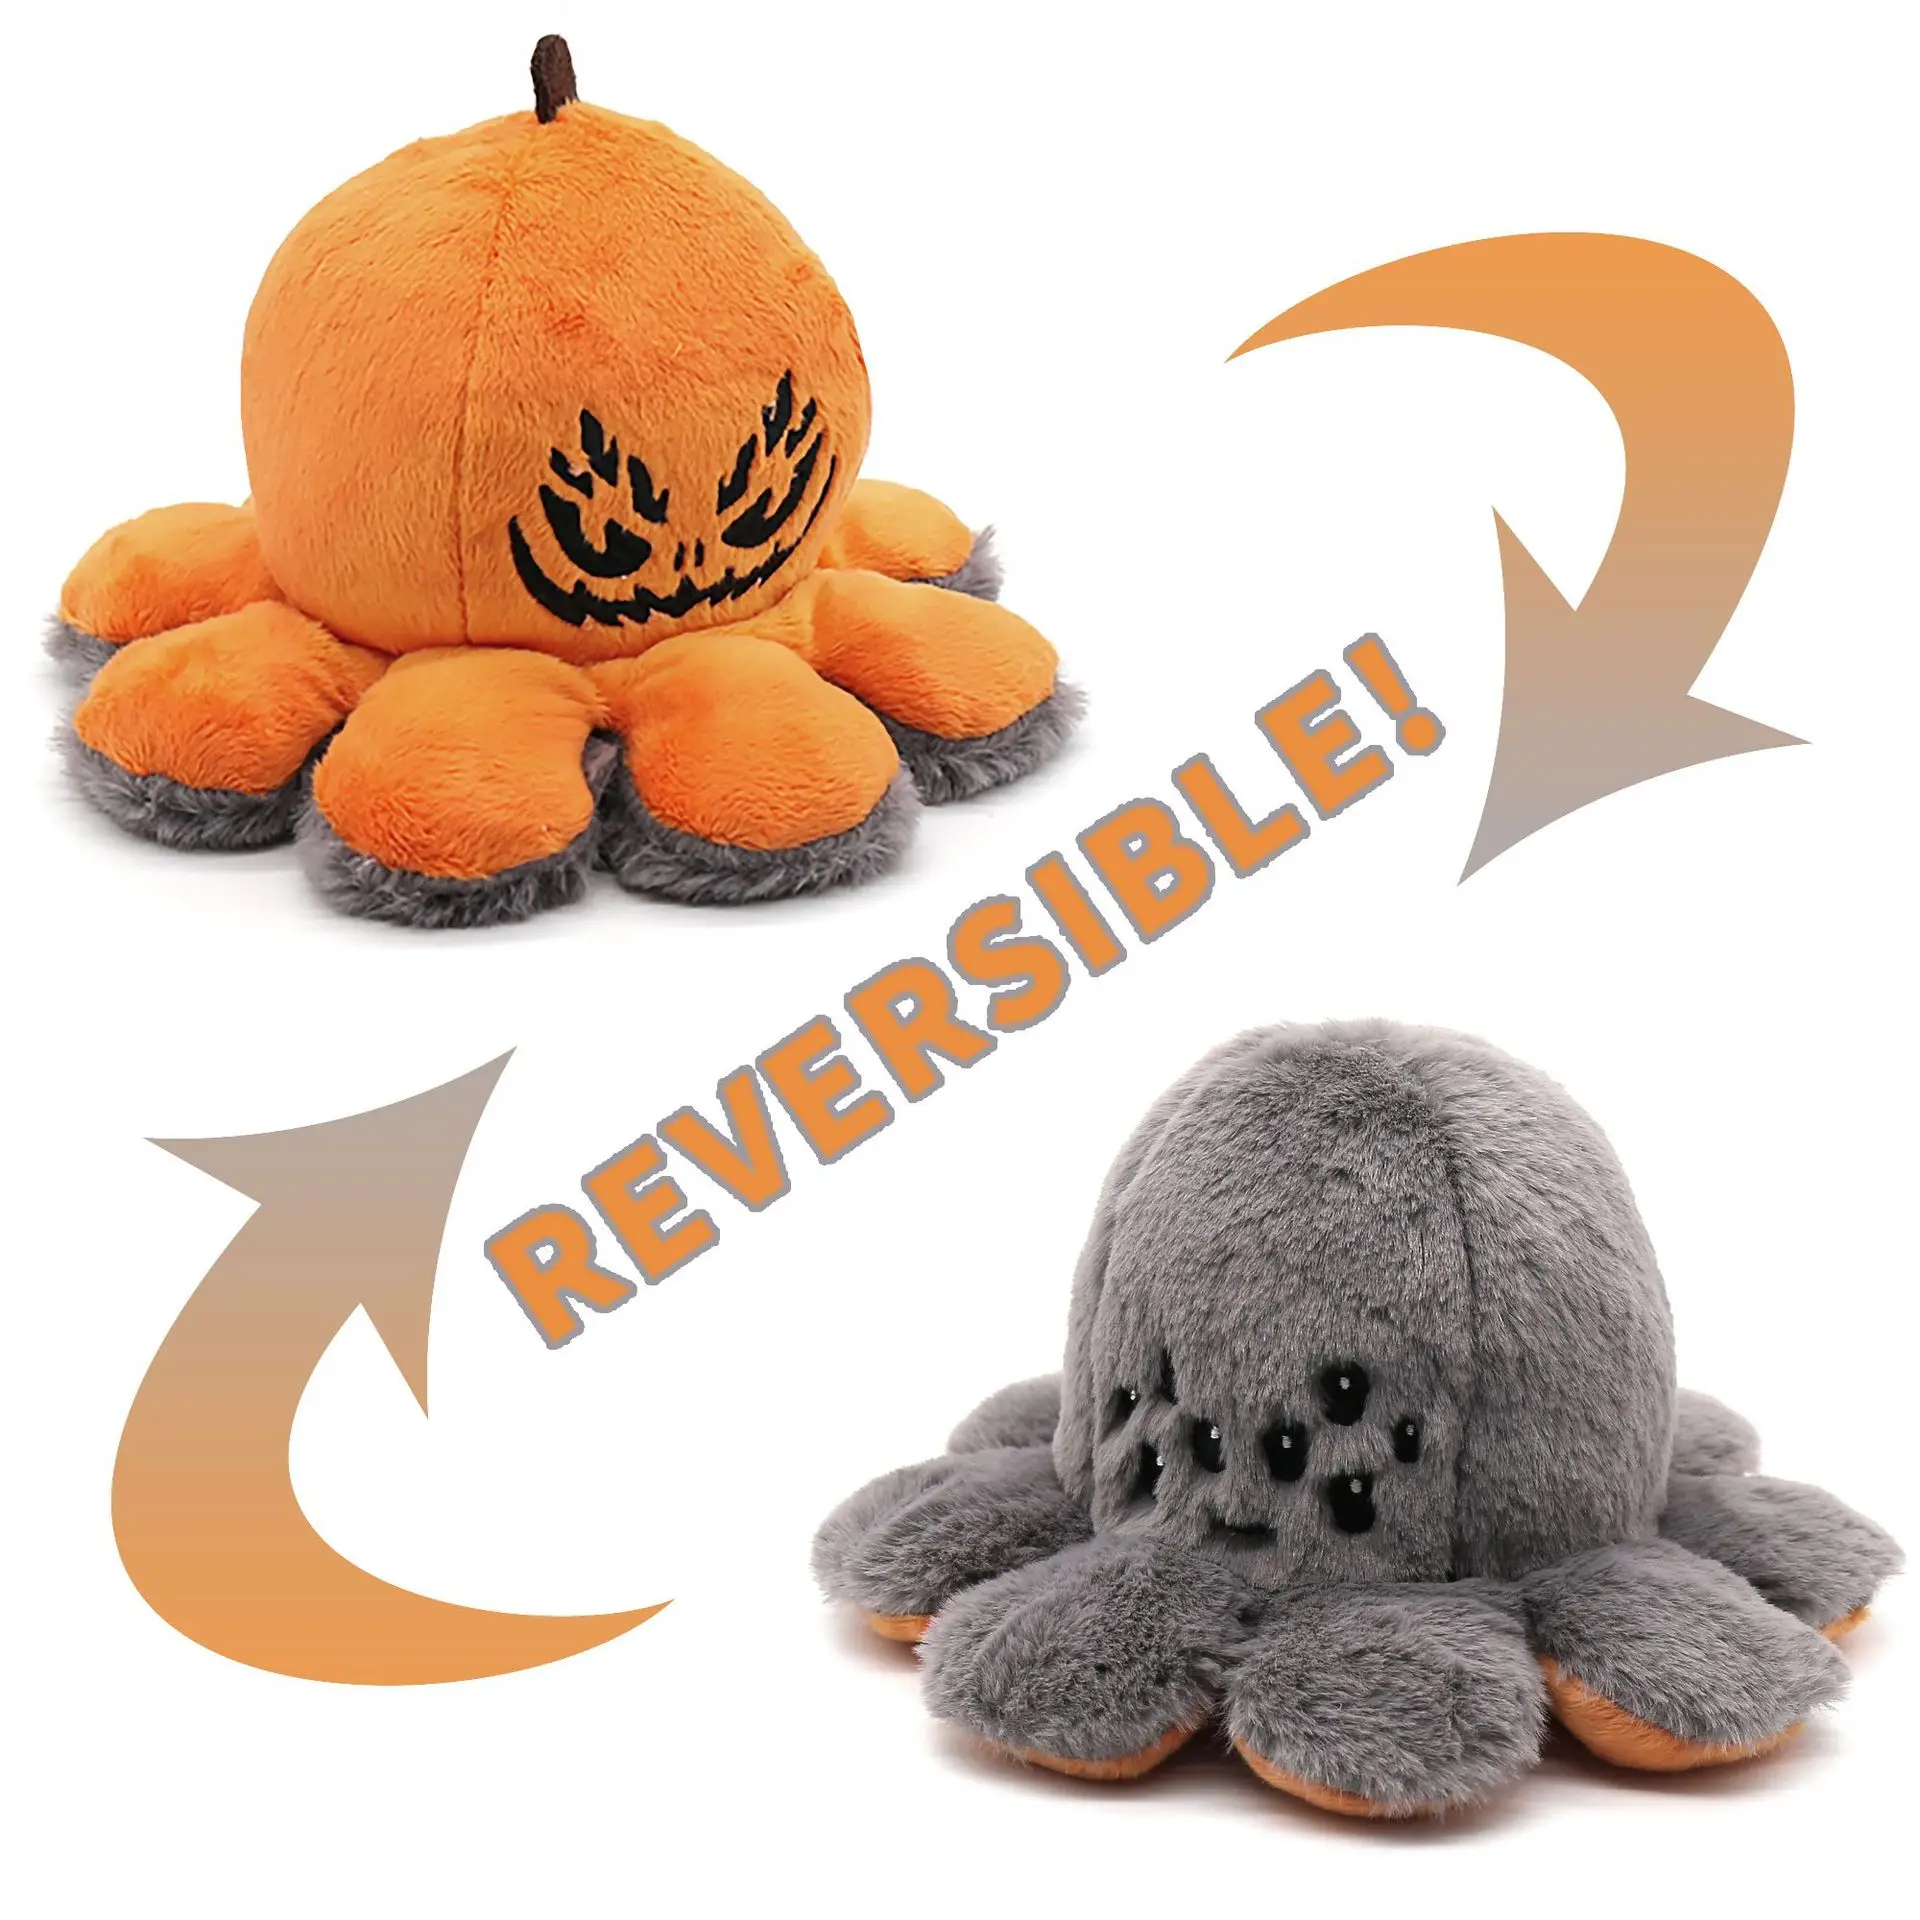 

Reversible Flip Pumpkin Plush Toy Soft Cute Double-Sided Colorful Animal Doll Popular Children Halloween Gifts Dropshipping